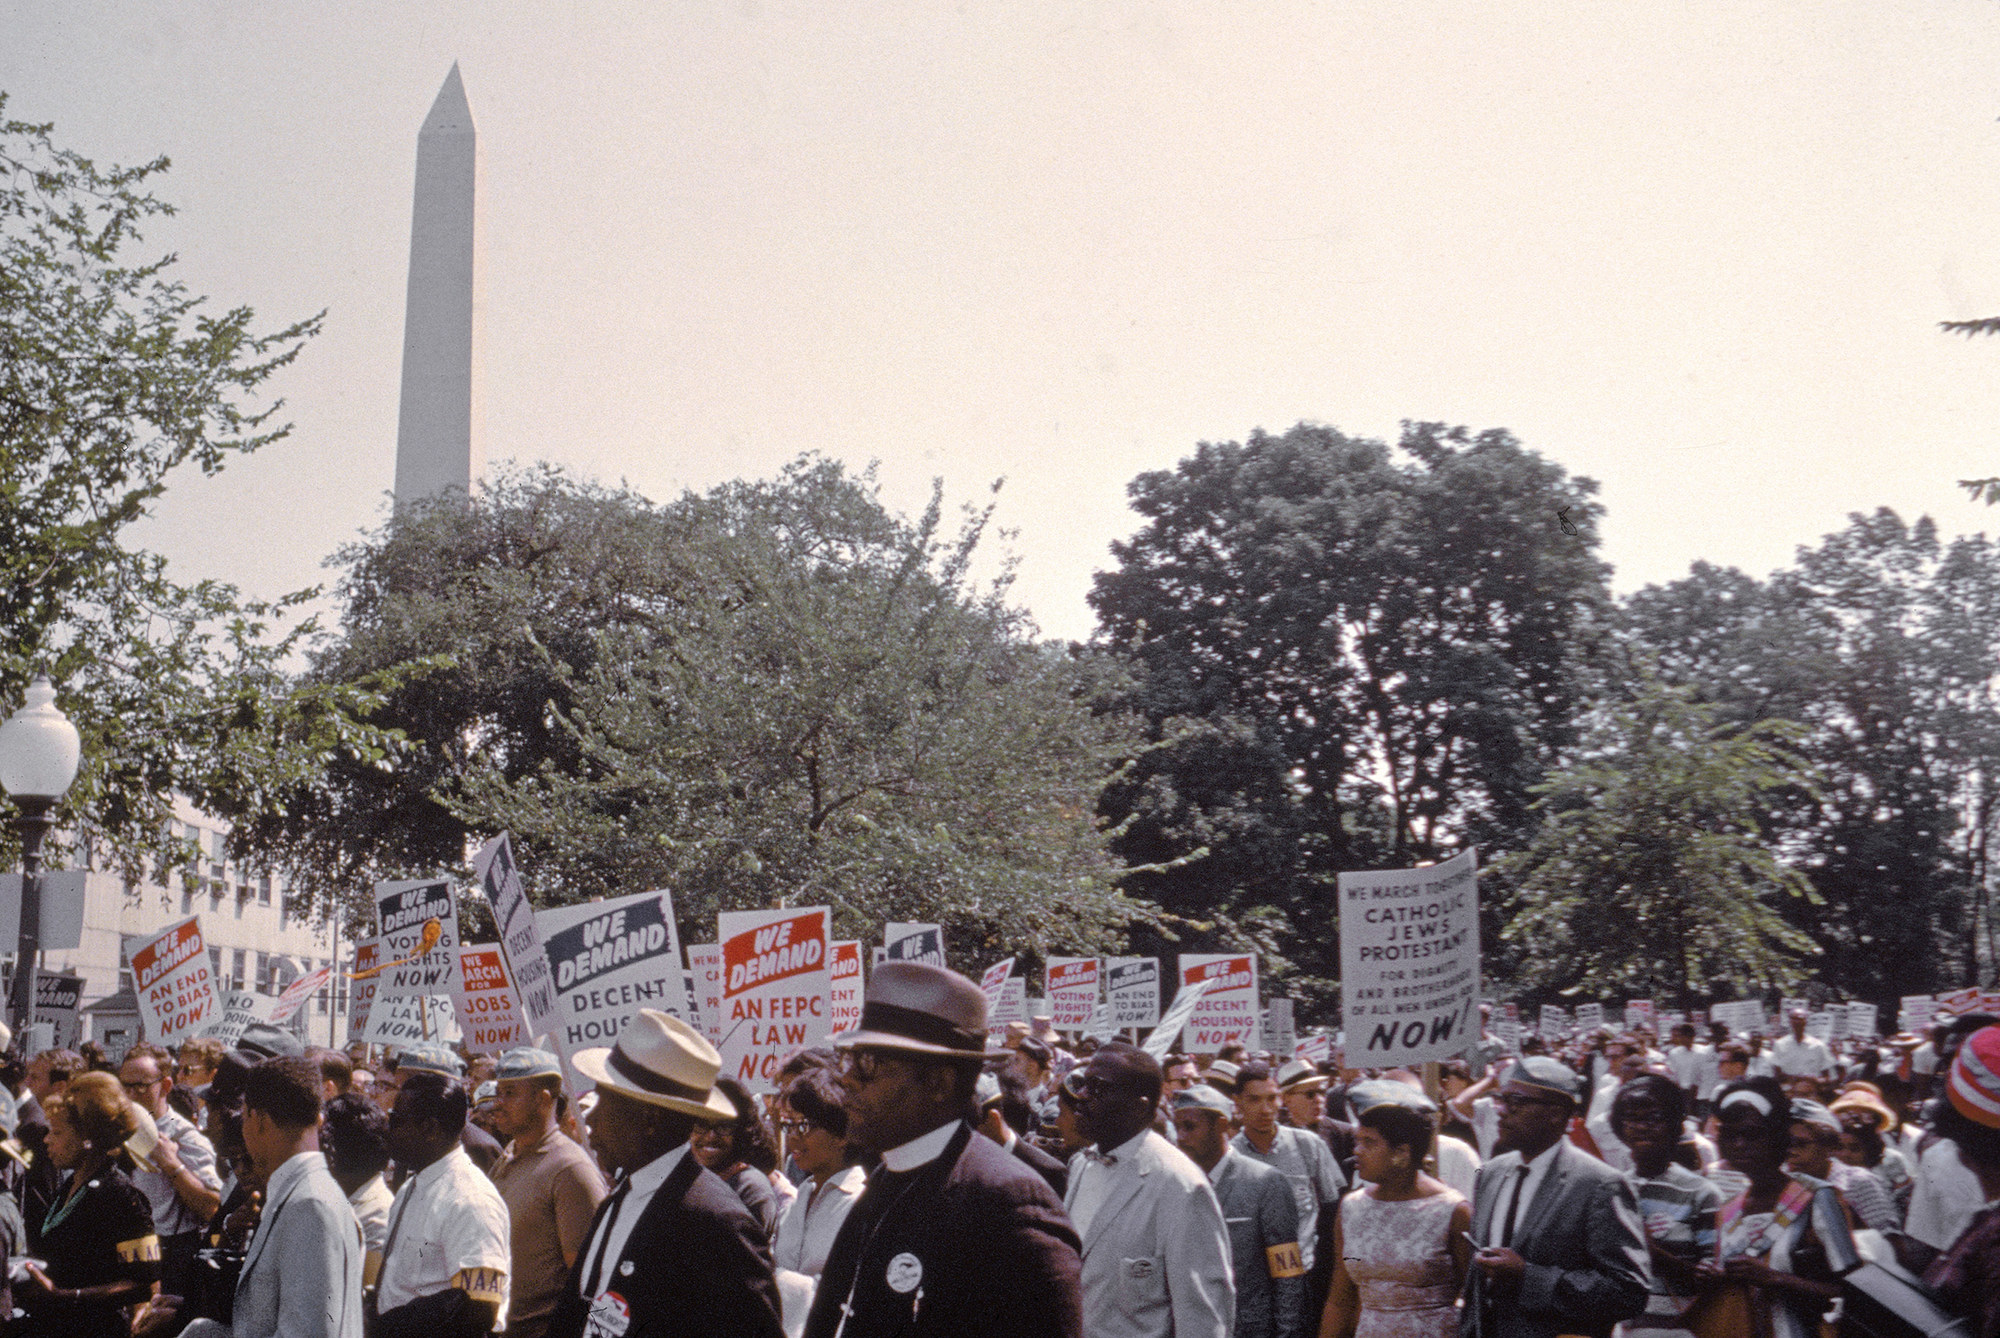 Attendees of the March on Washington are seen crowded in a street near the Washington Monument.